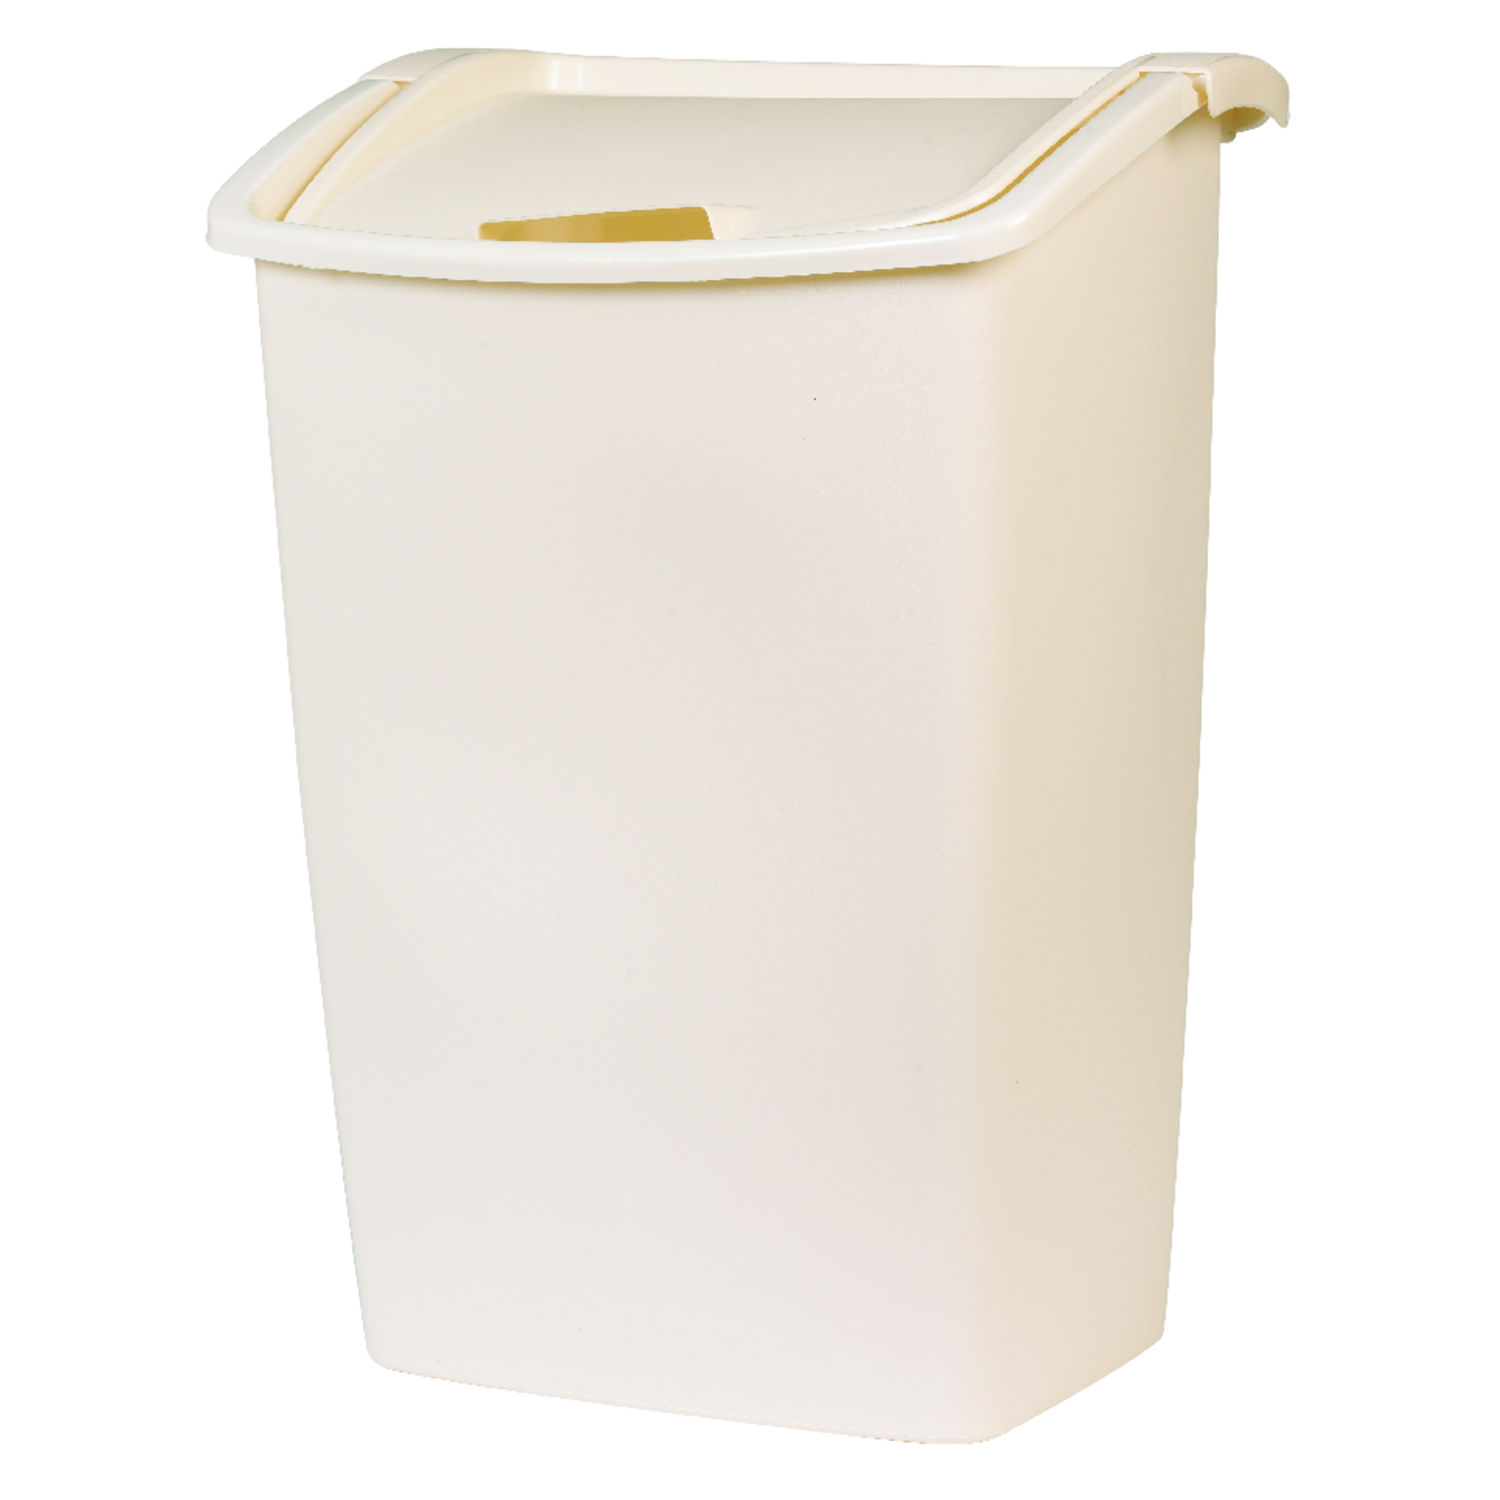 Rubbermaid FG280300BISQU Dual-Action Swing Lid Trash Can for Home